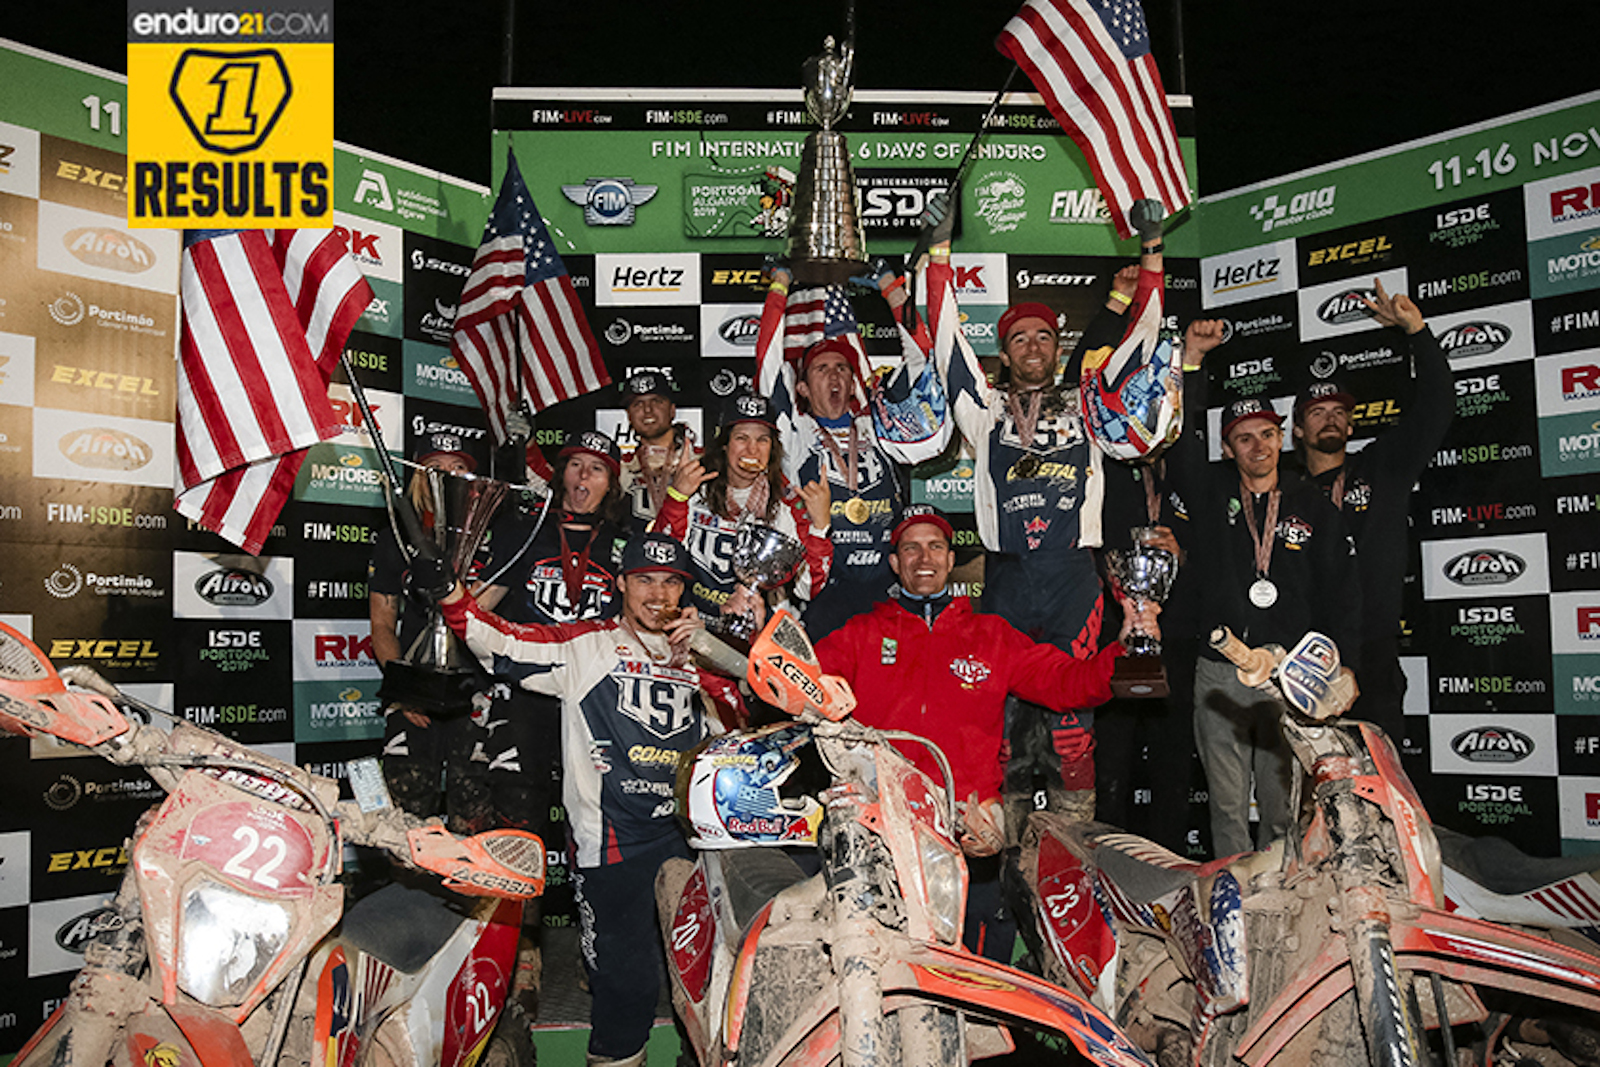 Results feed: ISDE 2019 Day 6 – USA take World and Women’s Trophies, Australia win the Juniors